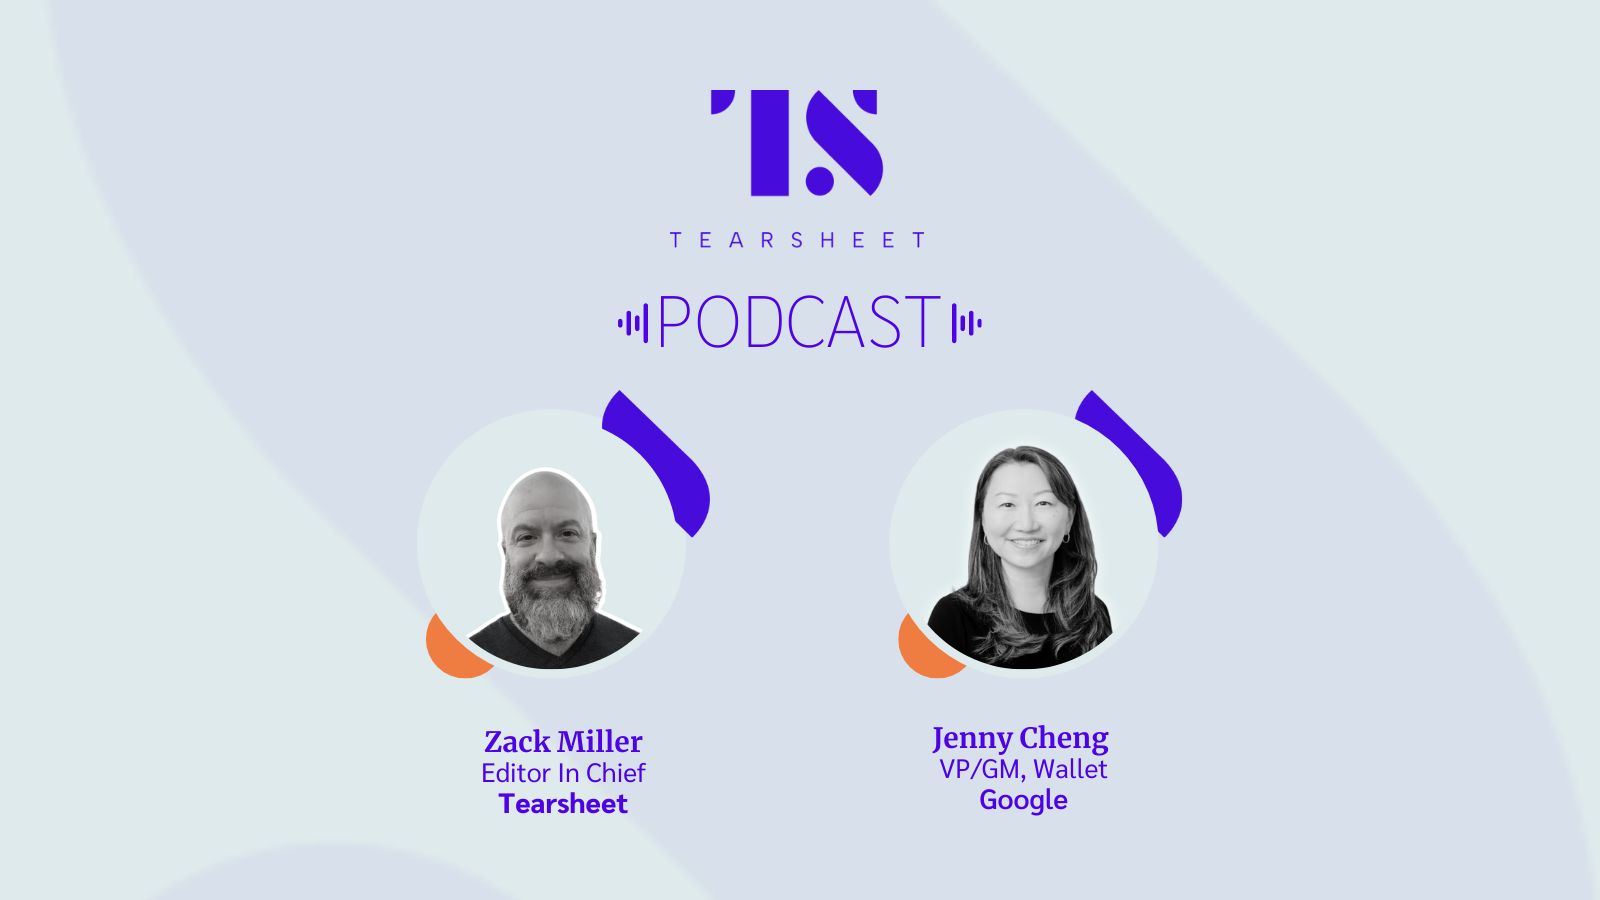 A year into the Google Wallet launch with Jenny Cheng